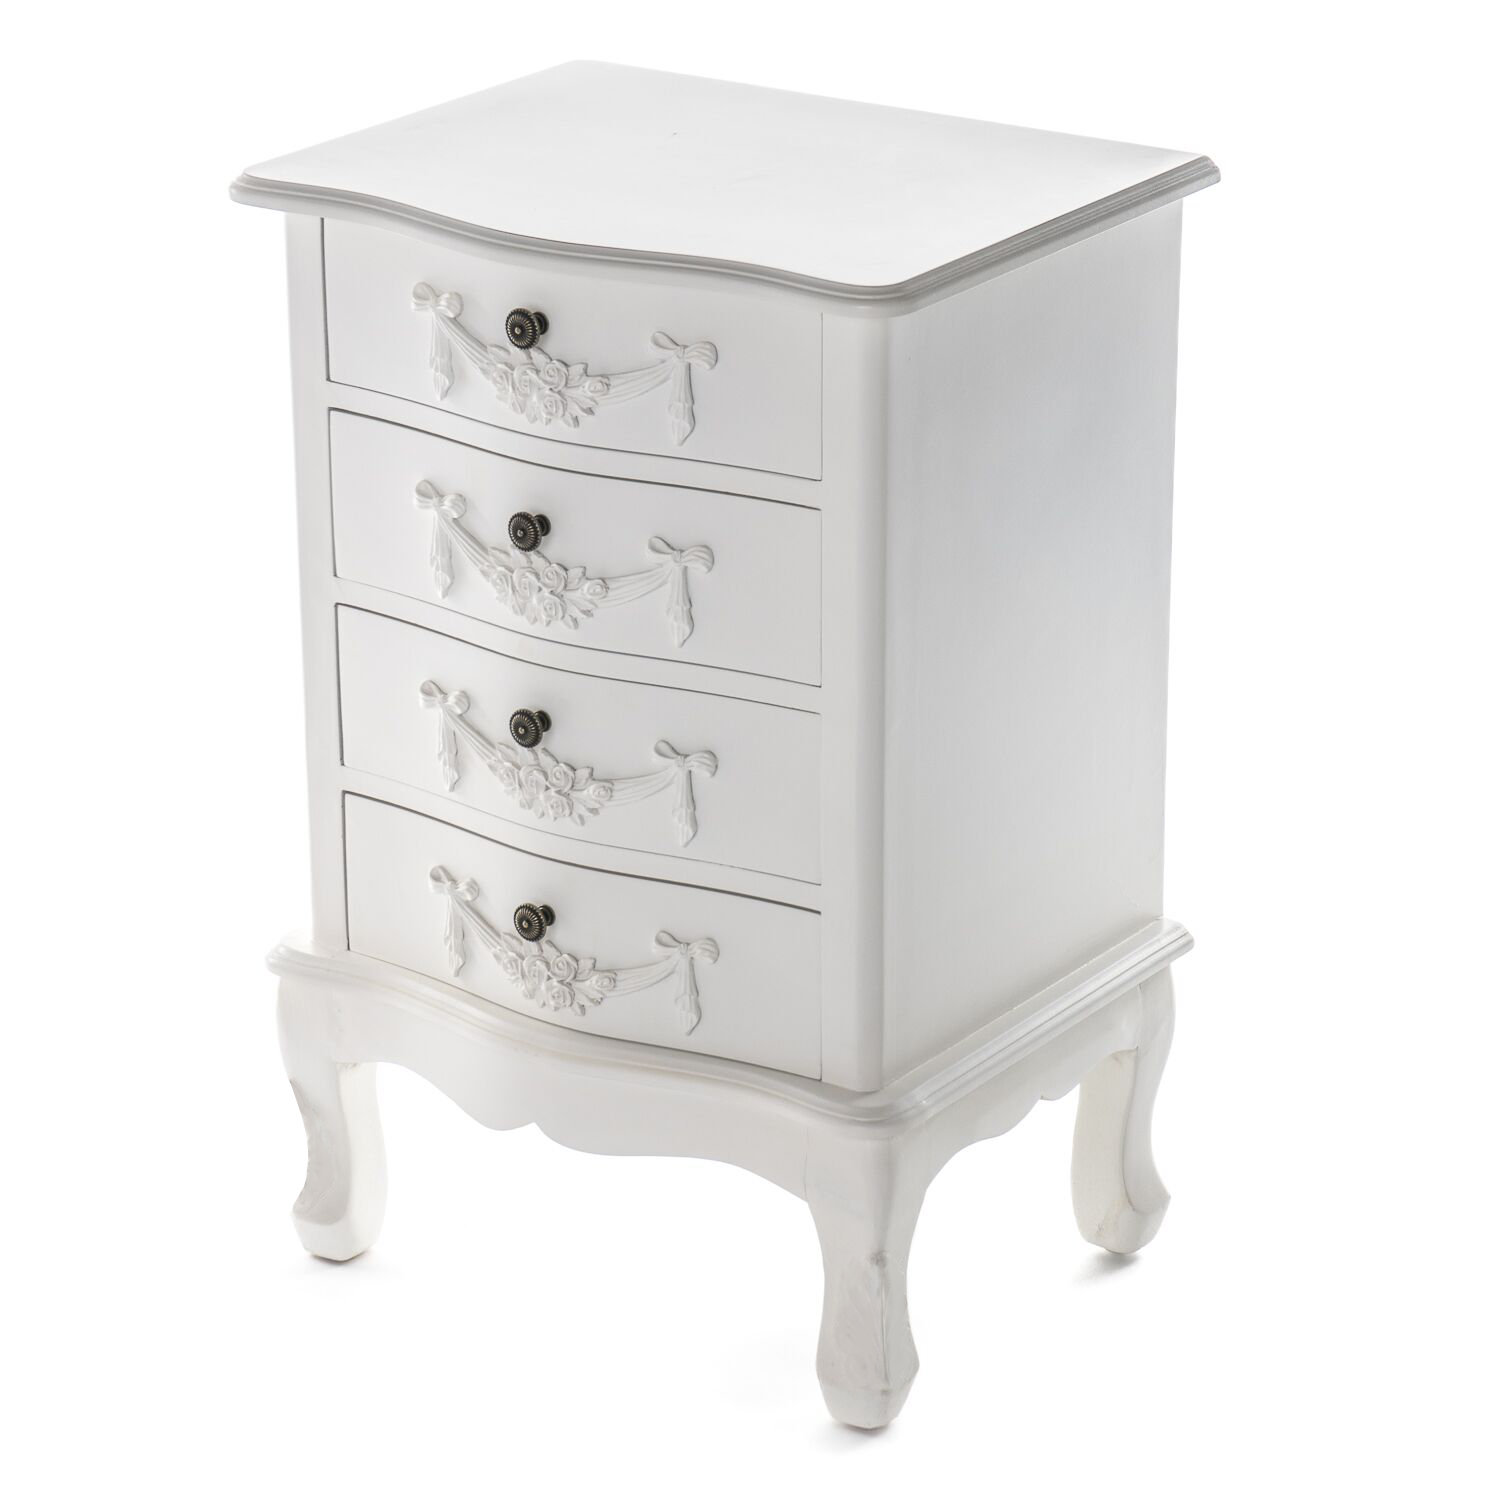 Floral Chest Of Drawers Fully Assembled White 4 Drawer Home